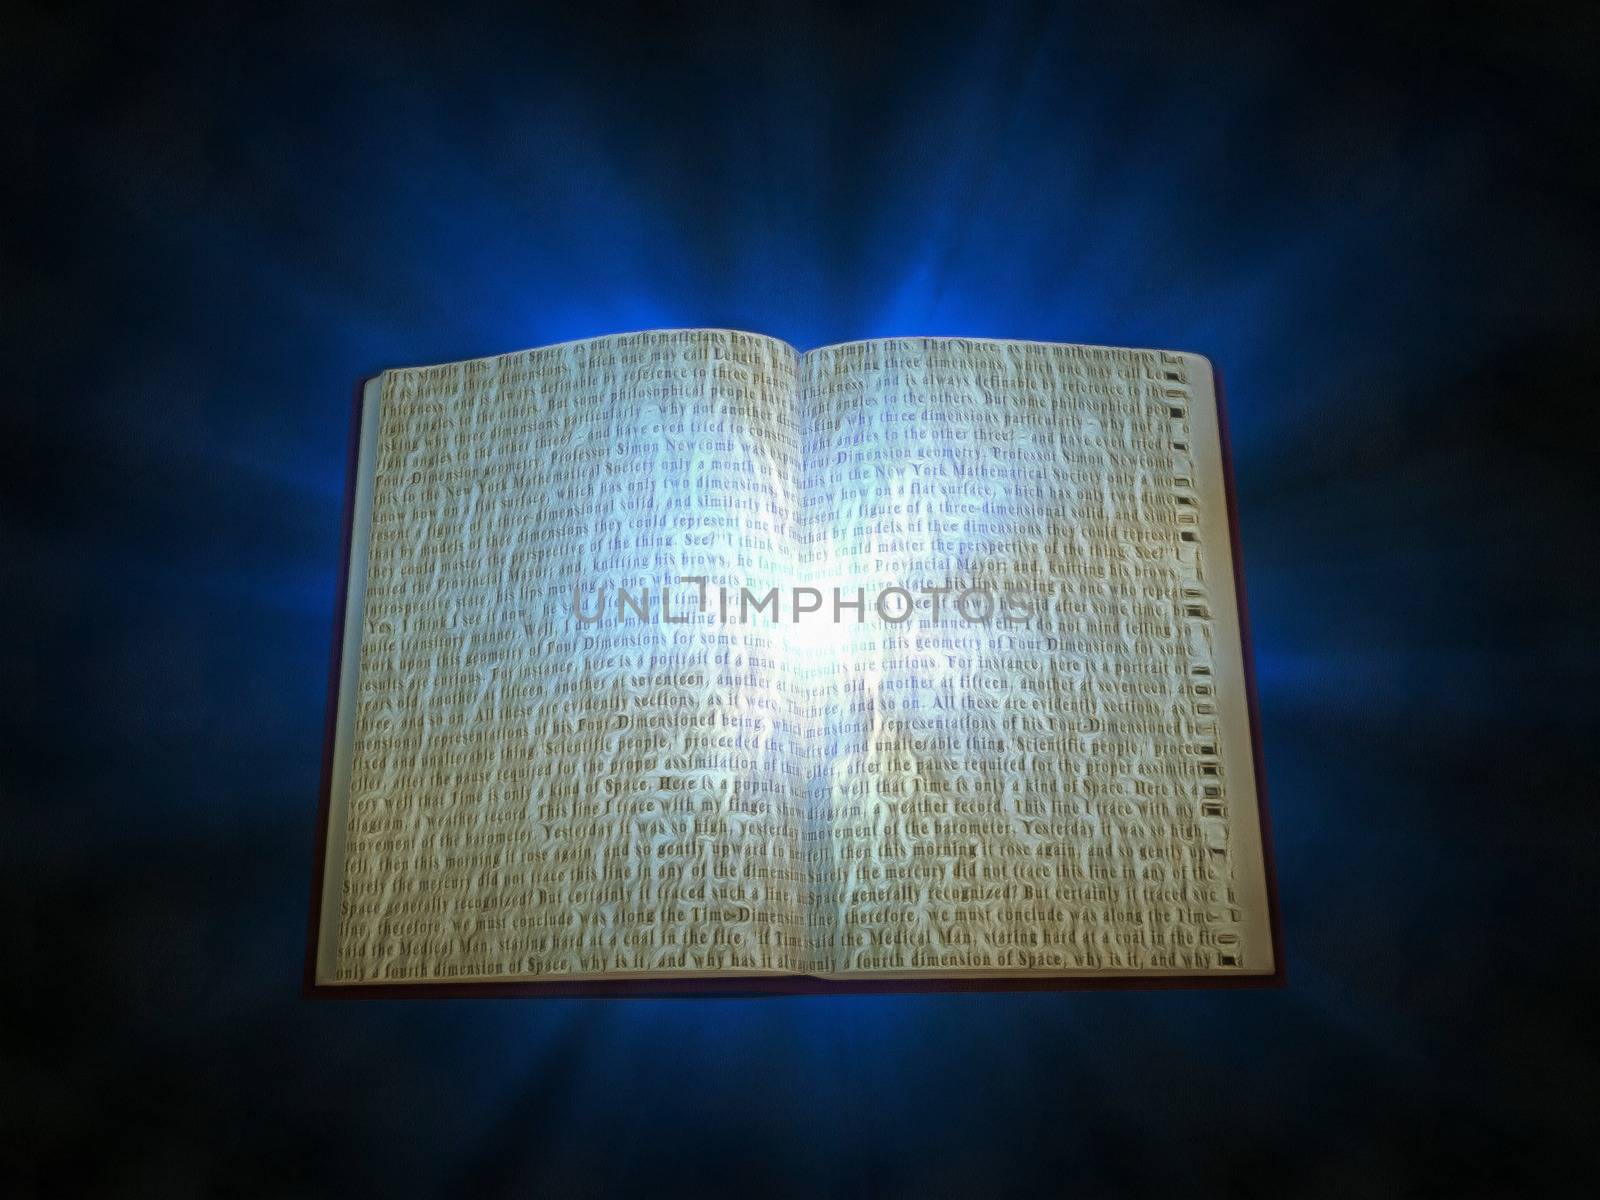 Book of light by applesstock